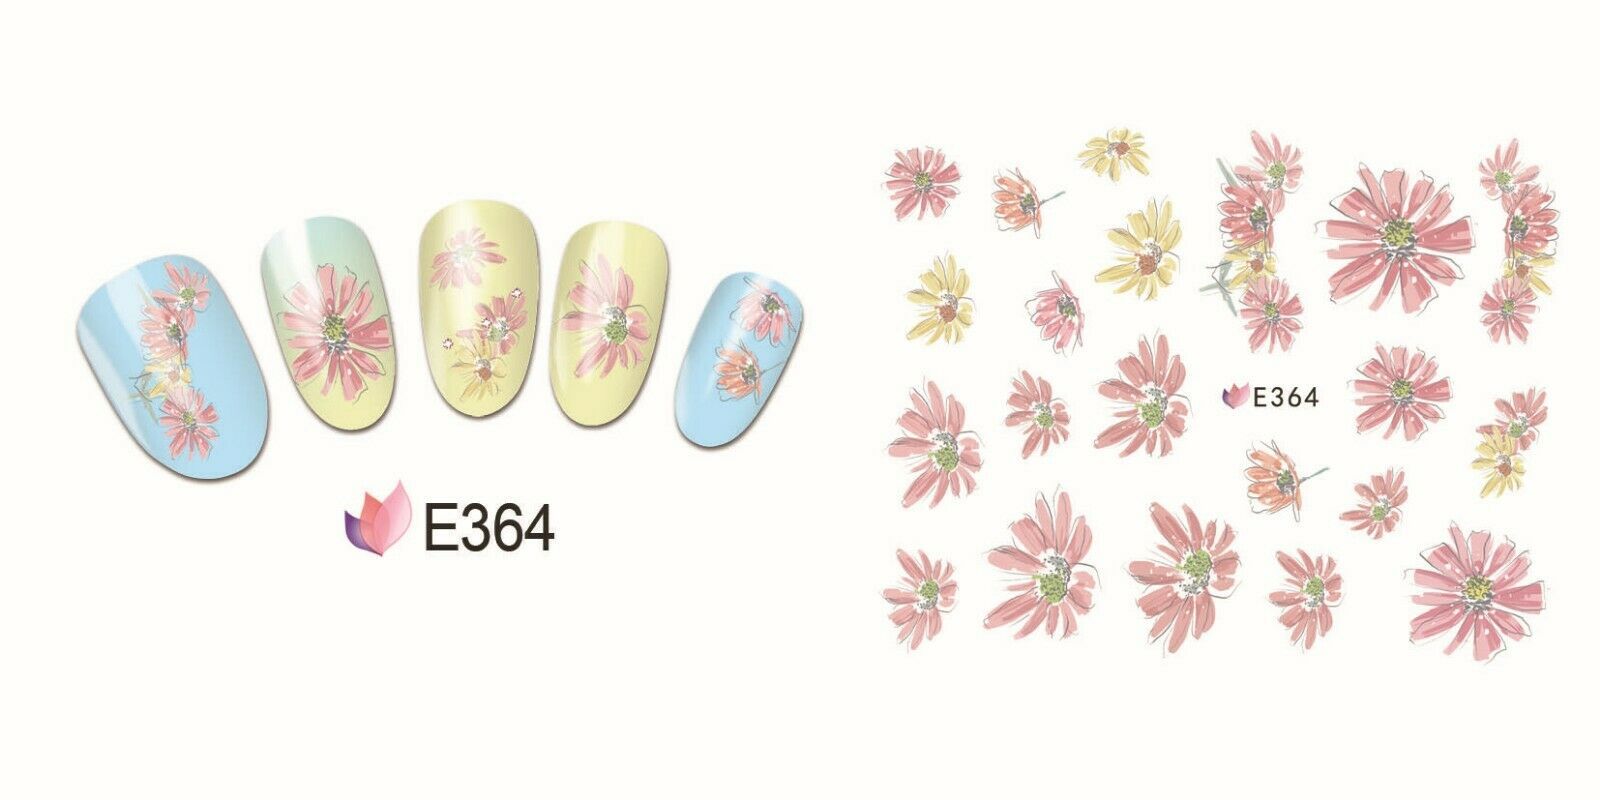 Nail Art 3D Decal Stickers Pastel Pink & Yellow Flowers E364